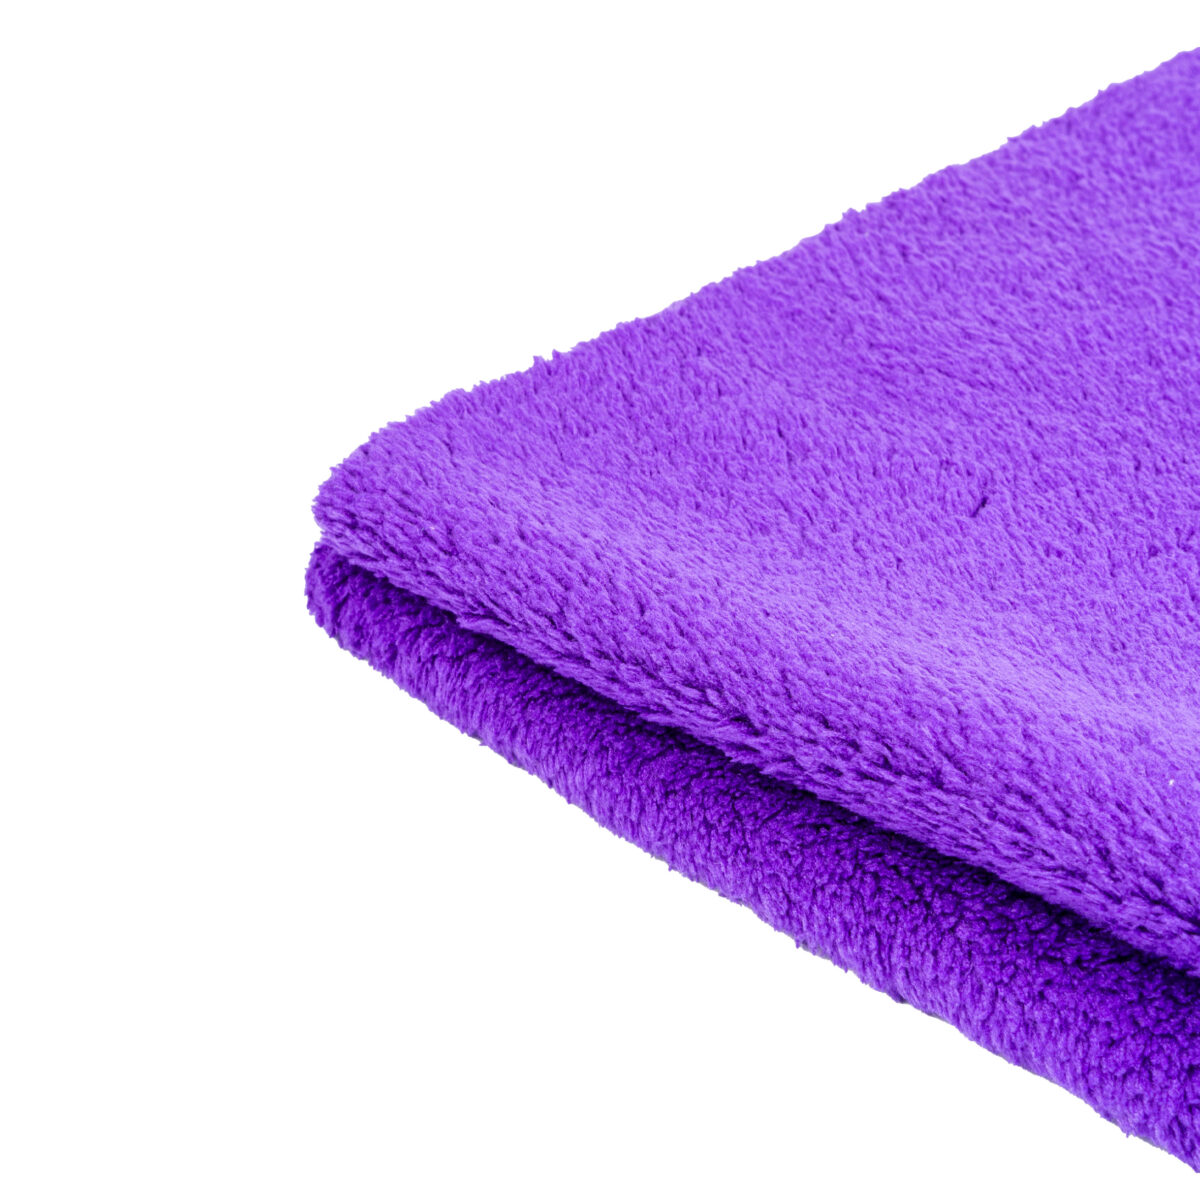 Deluxe edgeless buffing towel